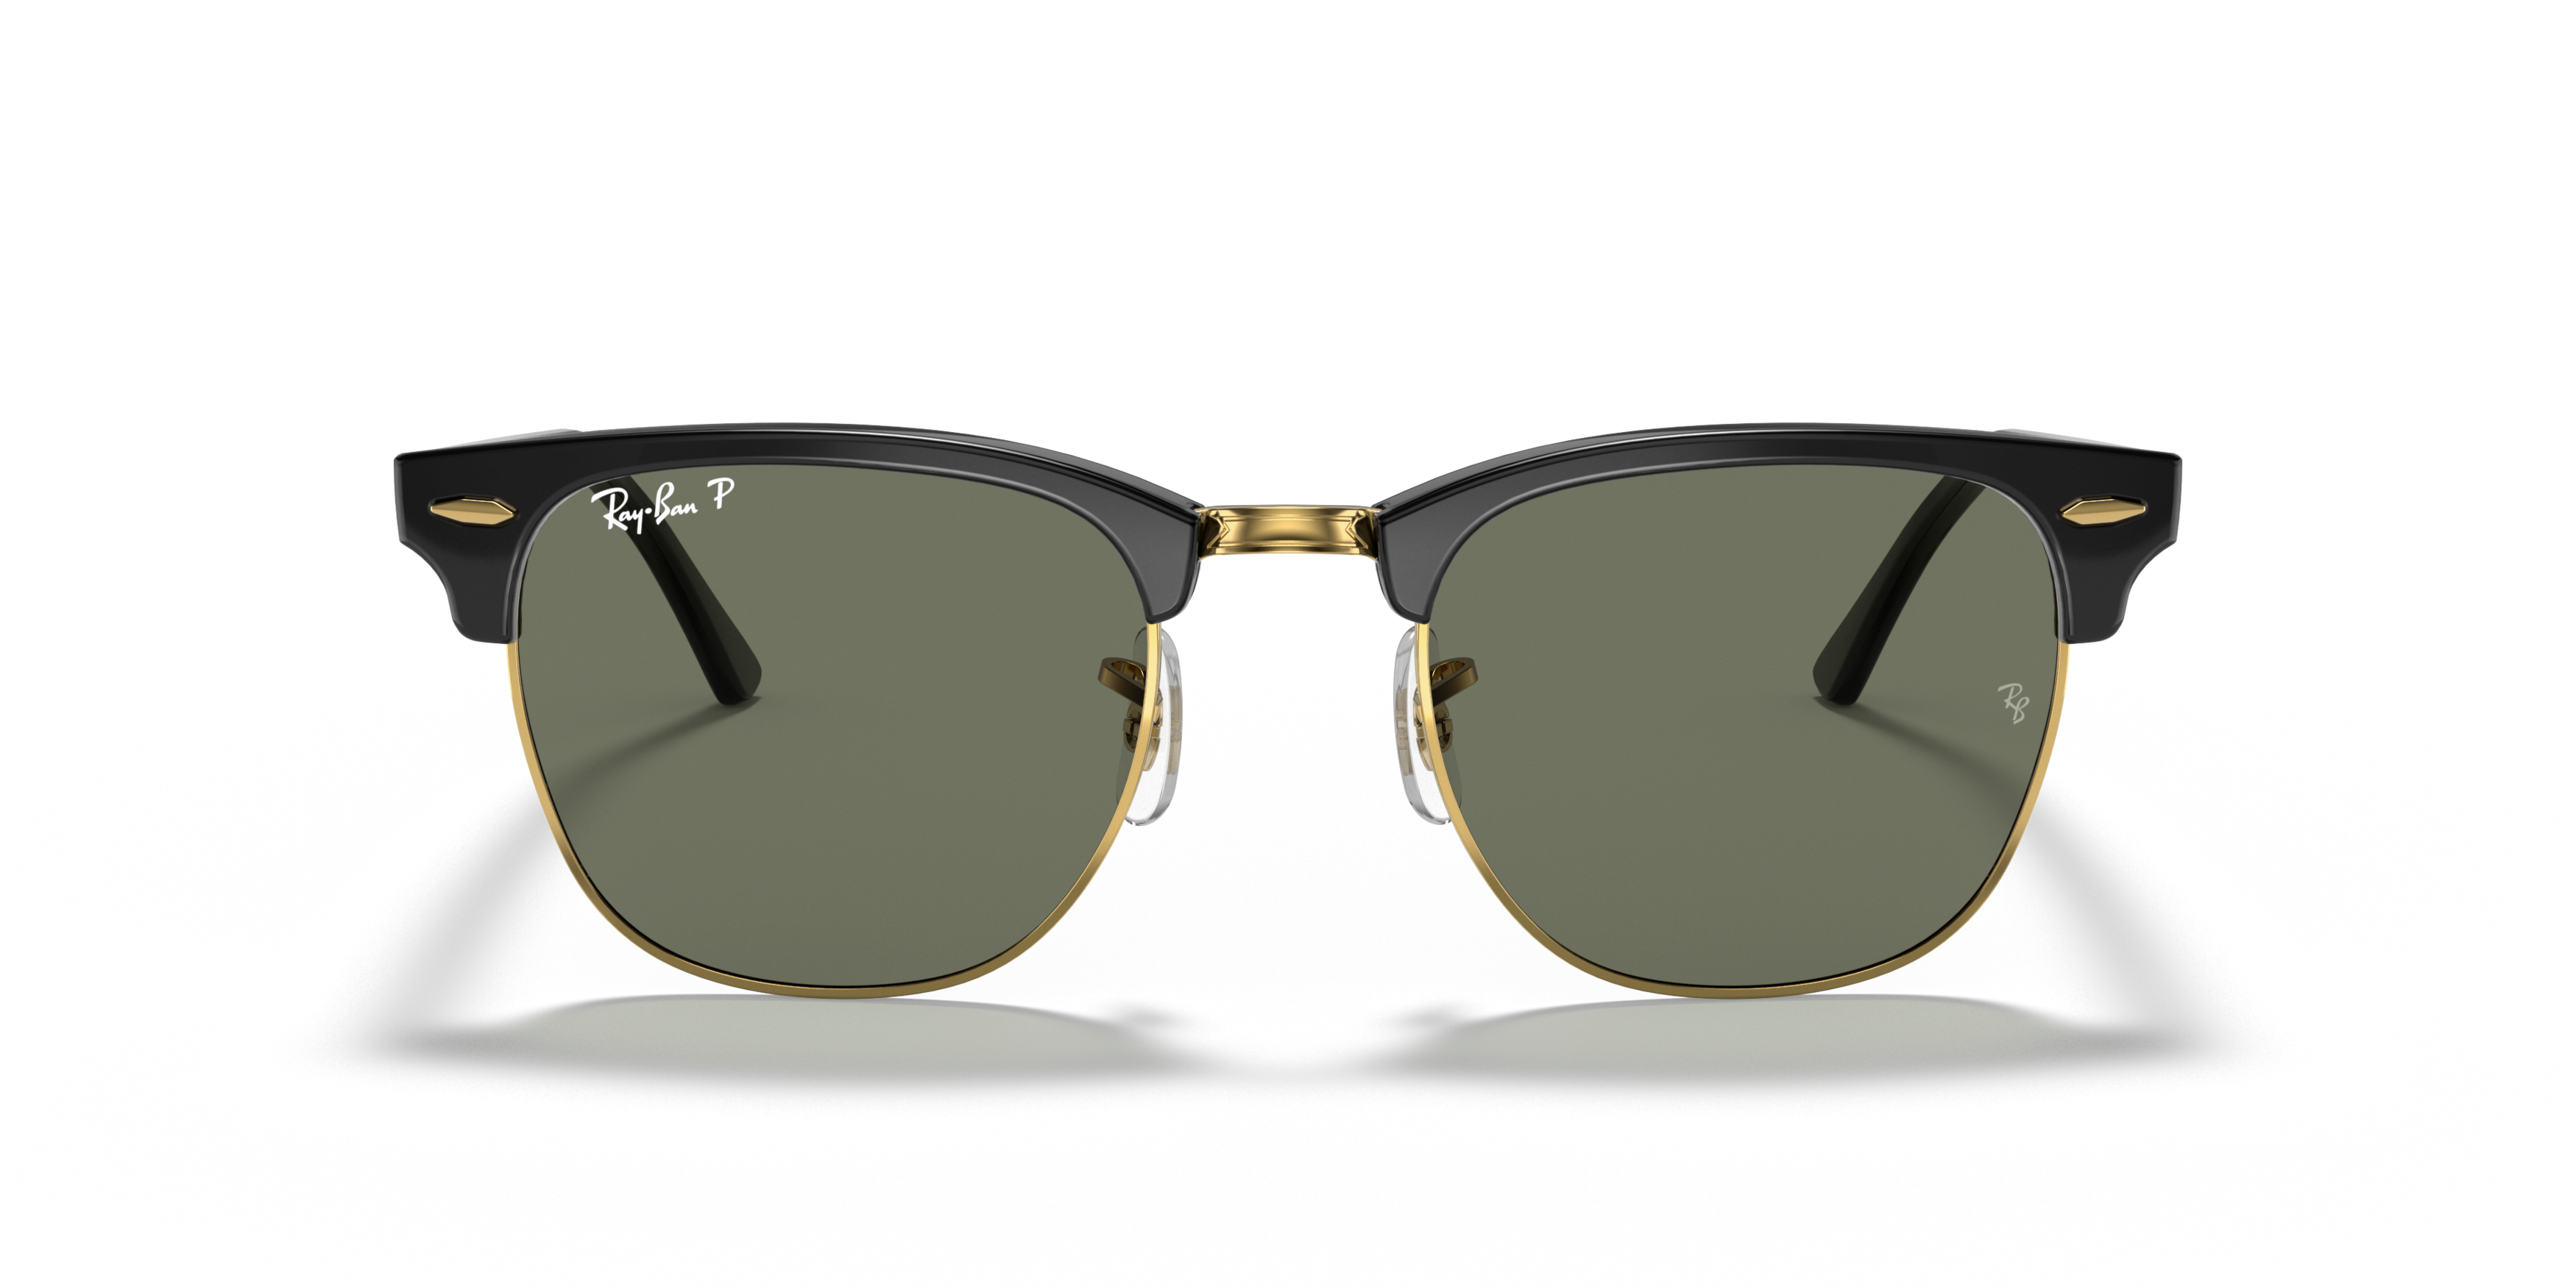 Ray-Ban Clubmaster Classic RB3016 901/58